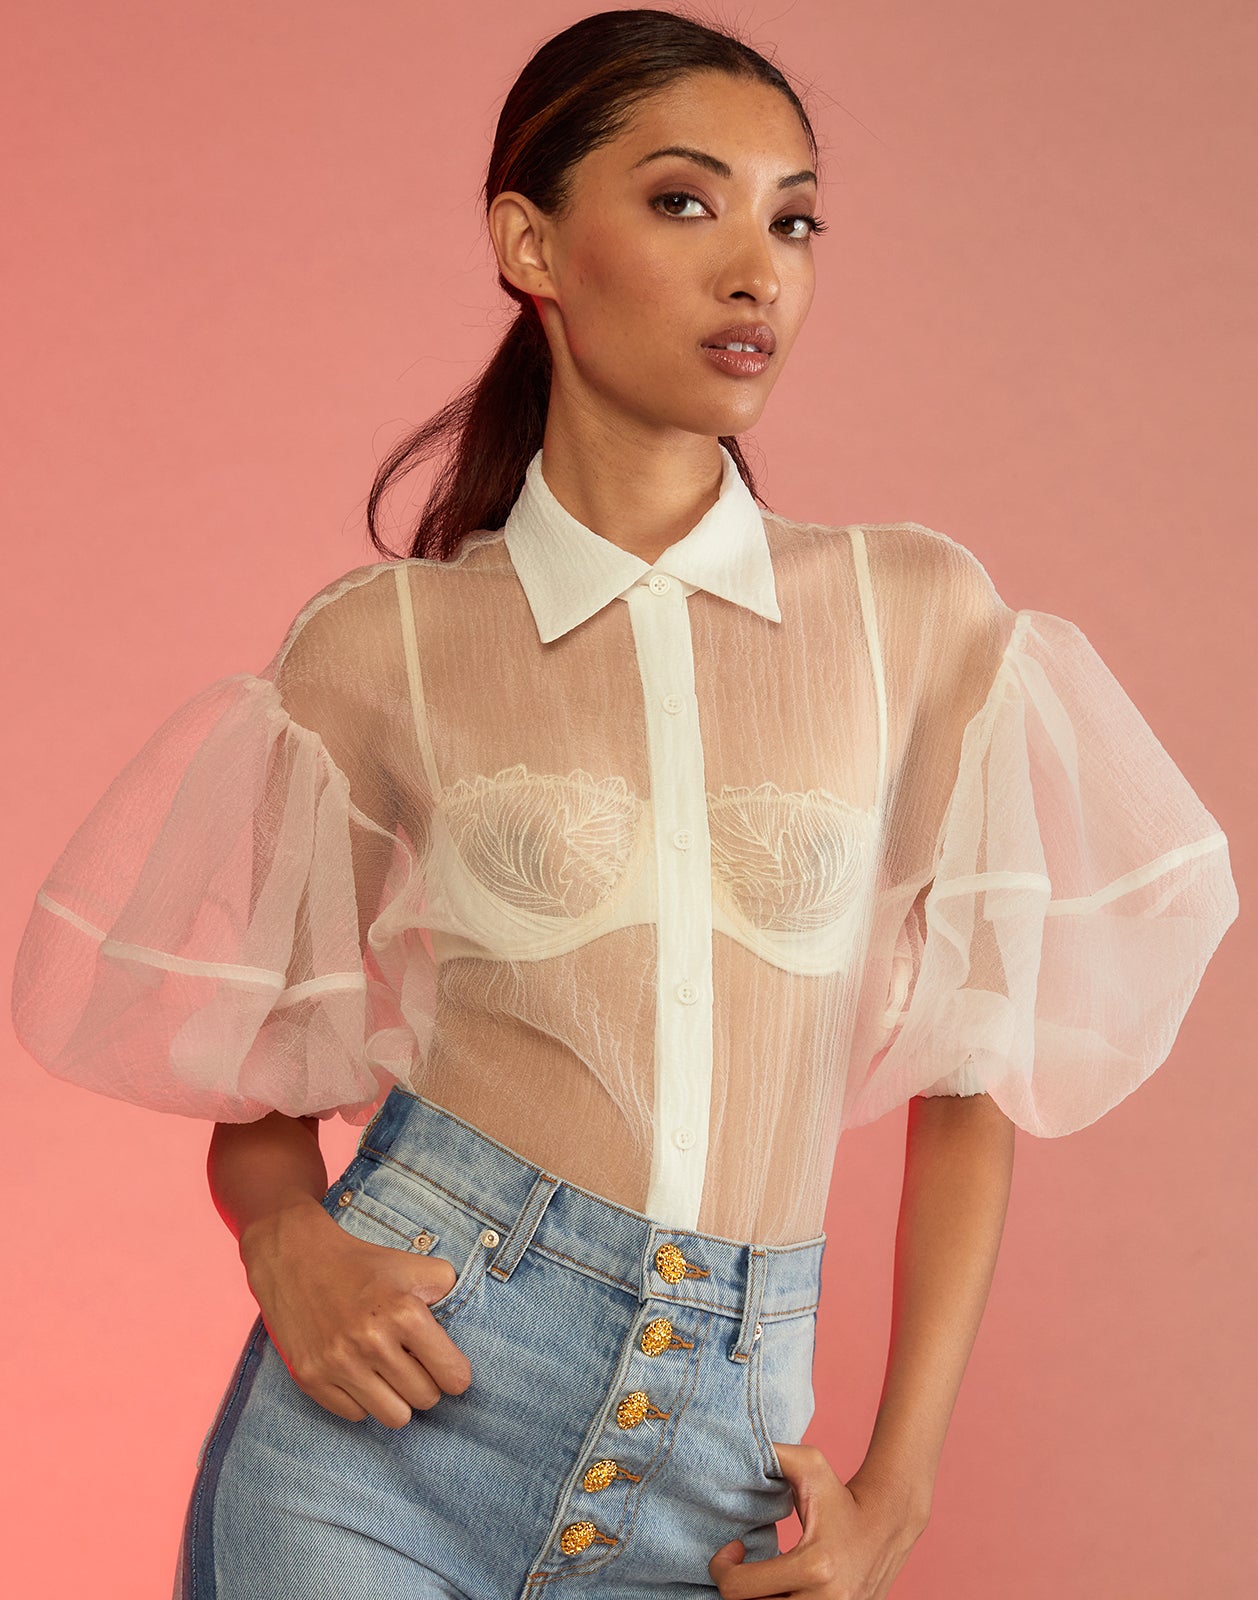 bradley laurent recommends see thru blouse pictures pic